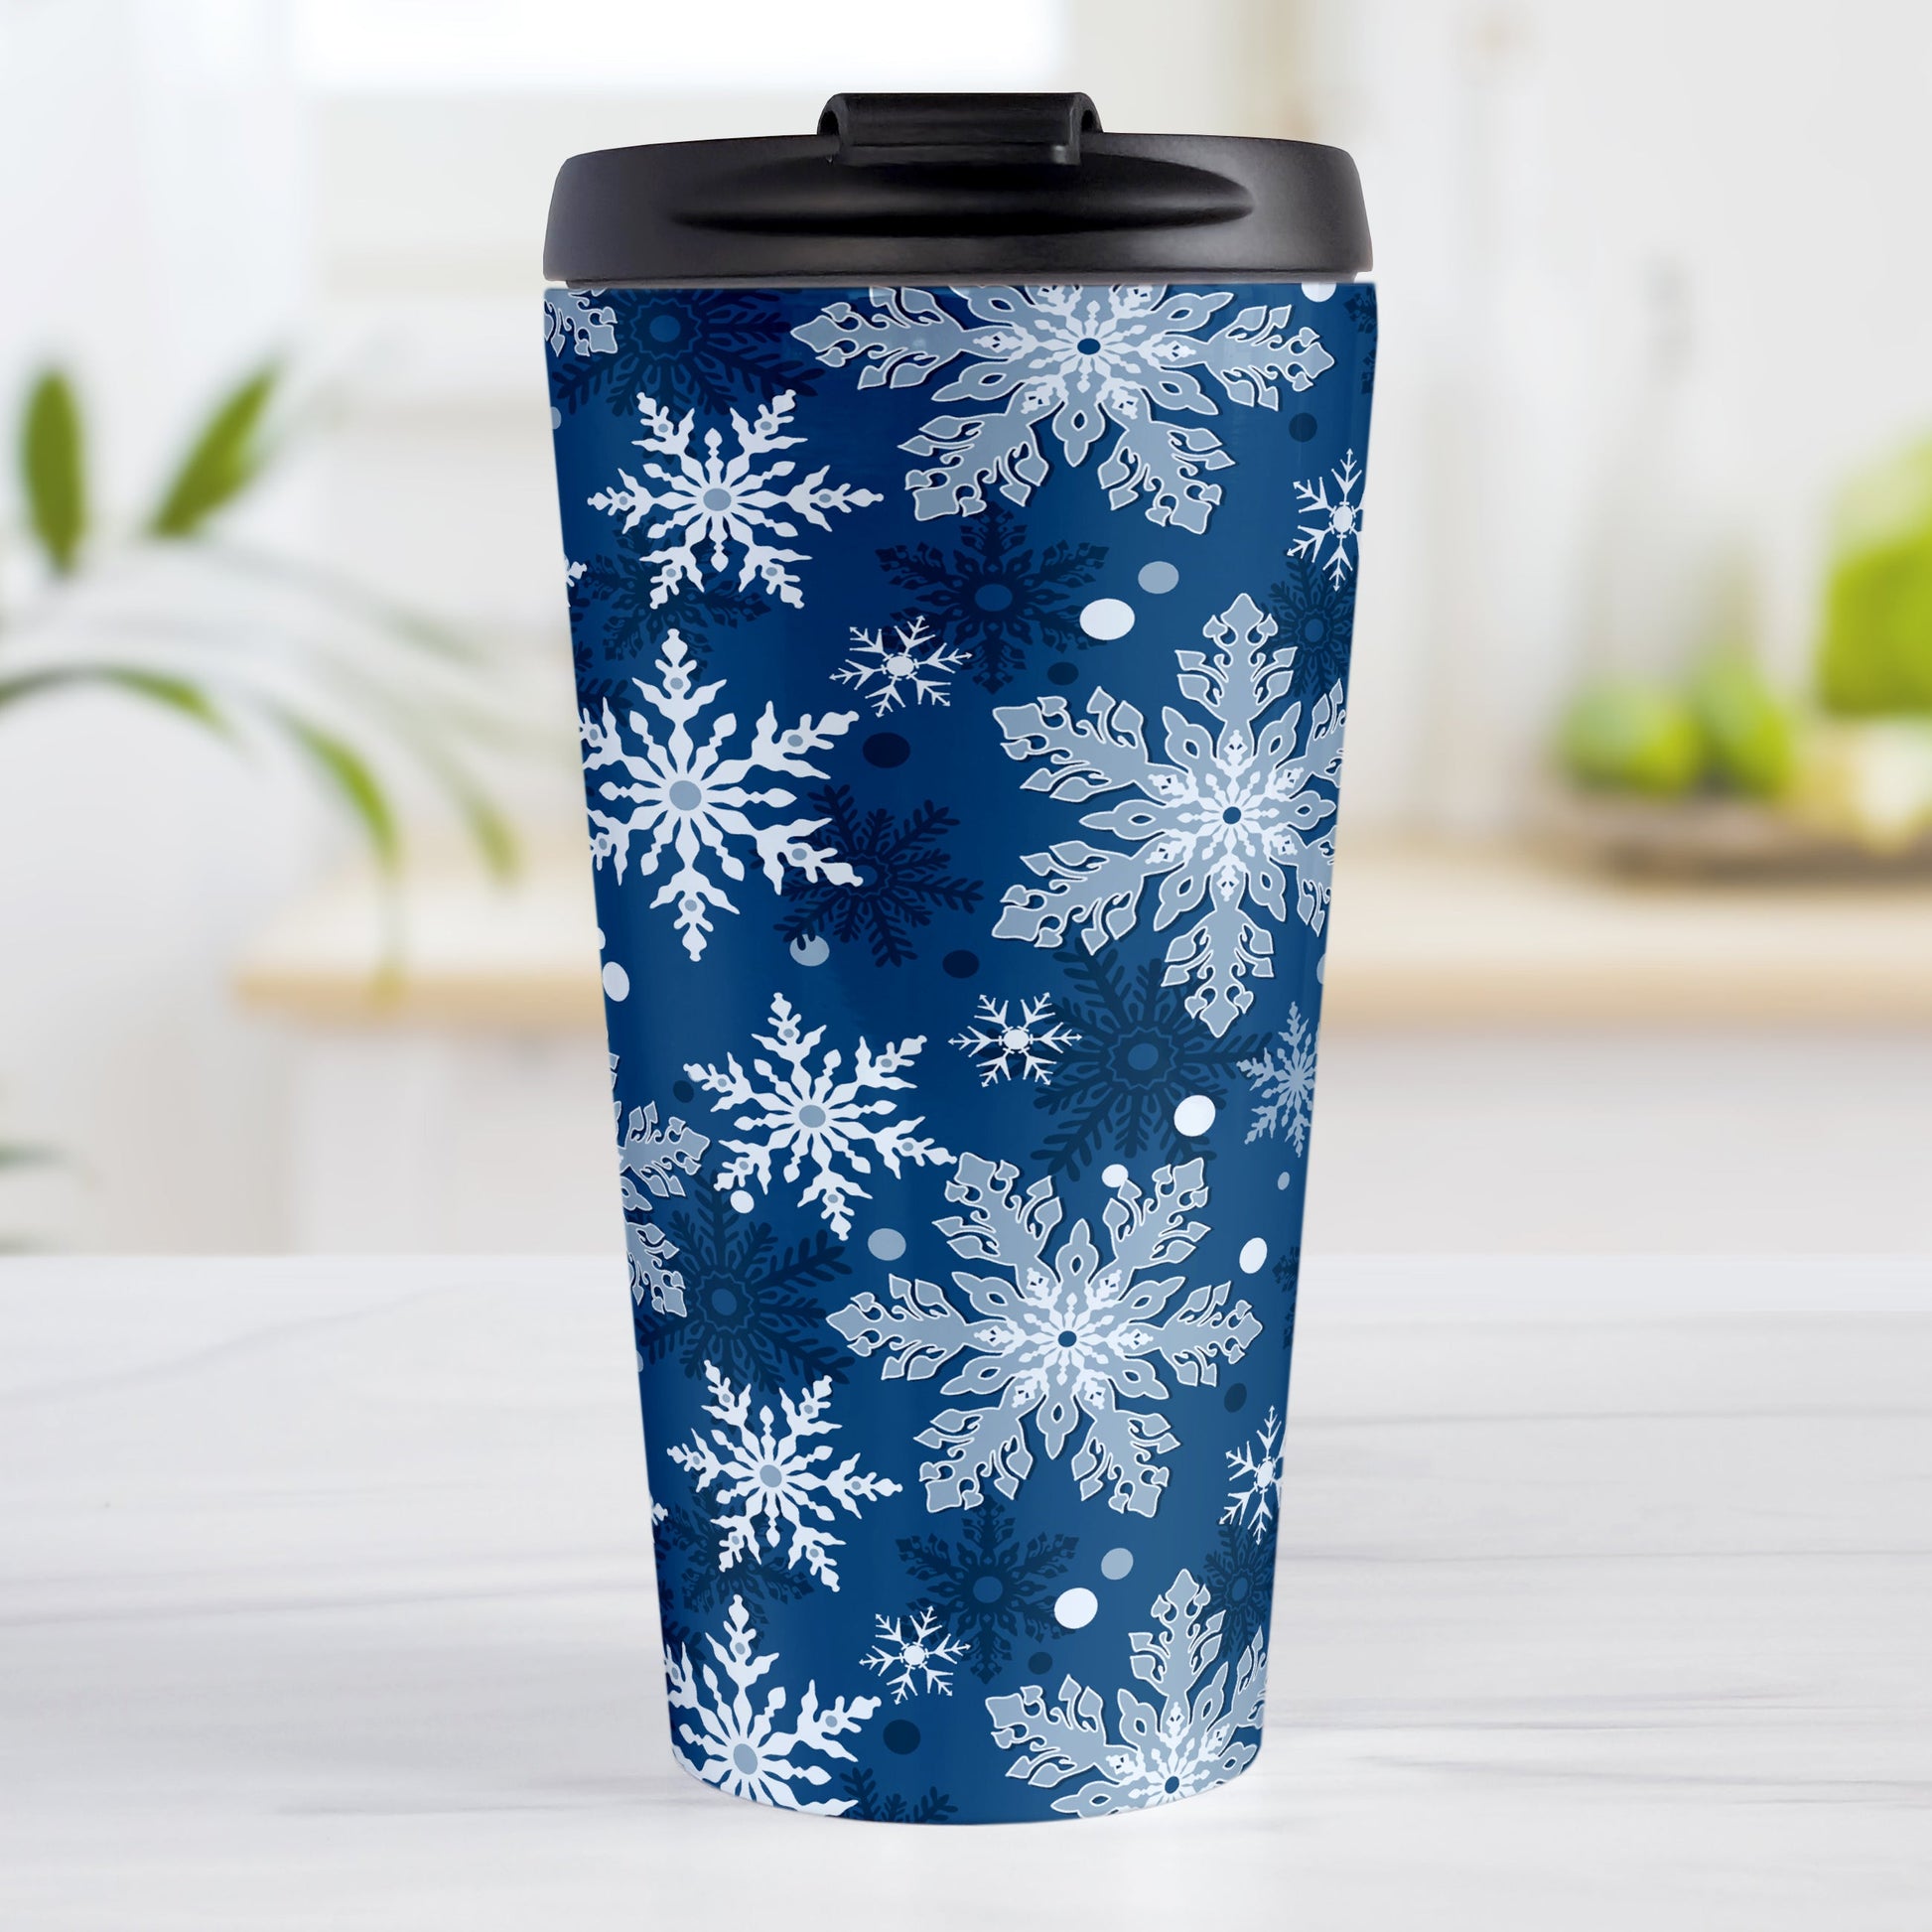 Classic Blue Snowflake Pattern Winter Travel Mug (15oz) at Amy's Coffee Mugs. A stainless steel insulated travel mug designed with a pattern of different shades of blue snowflakes over a classic blue background color that wraps around the travel mug.